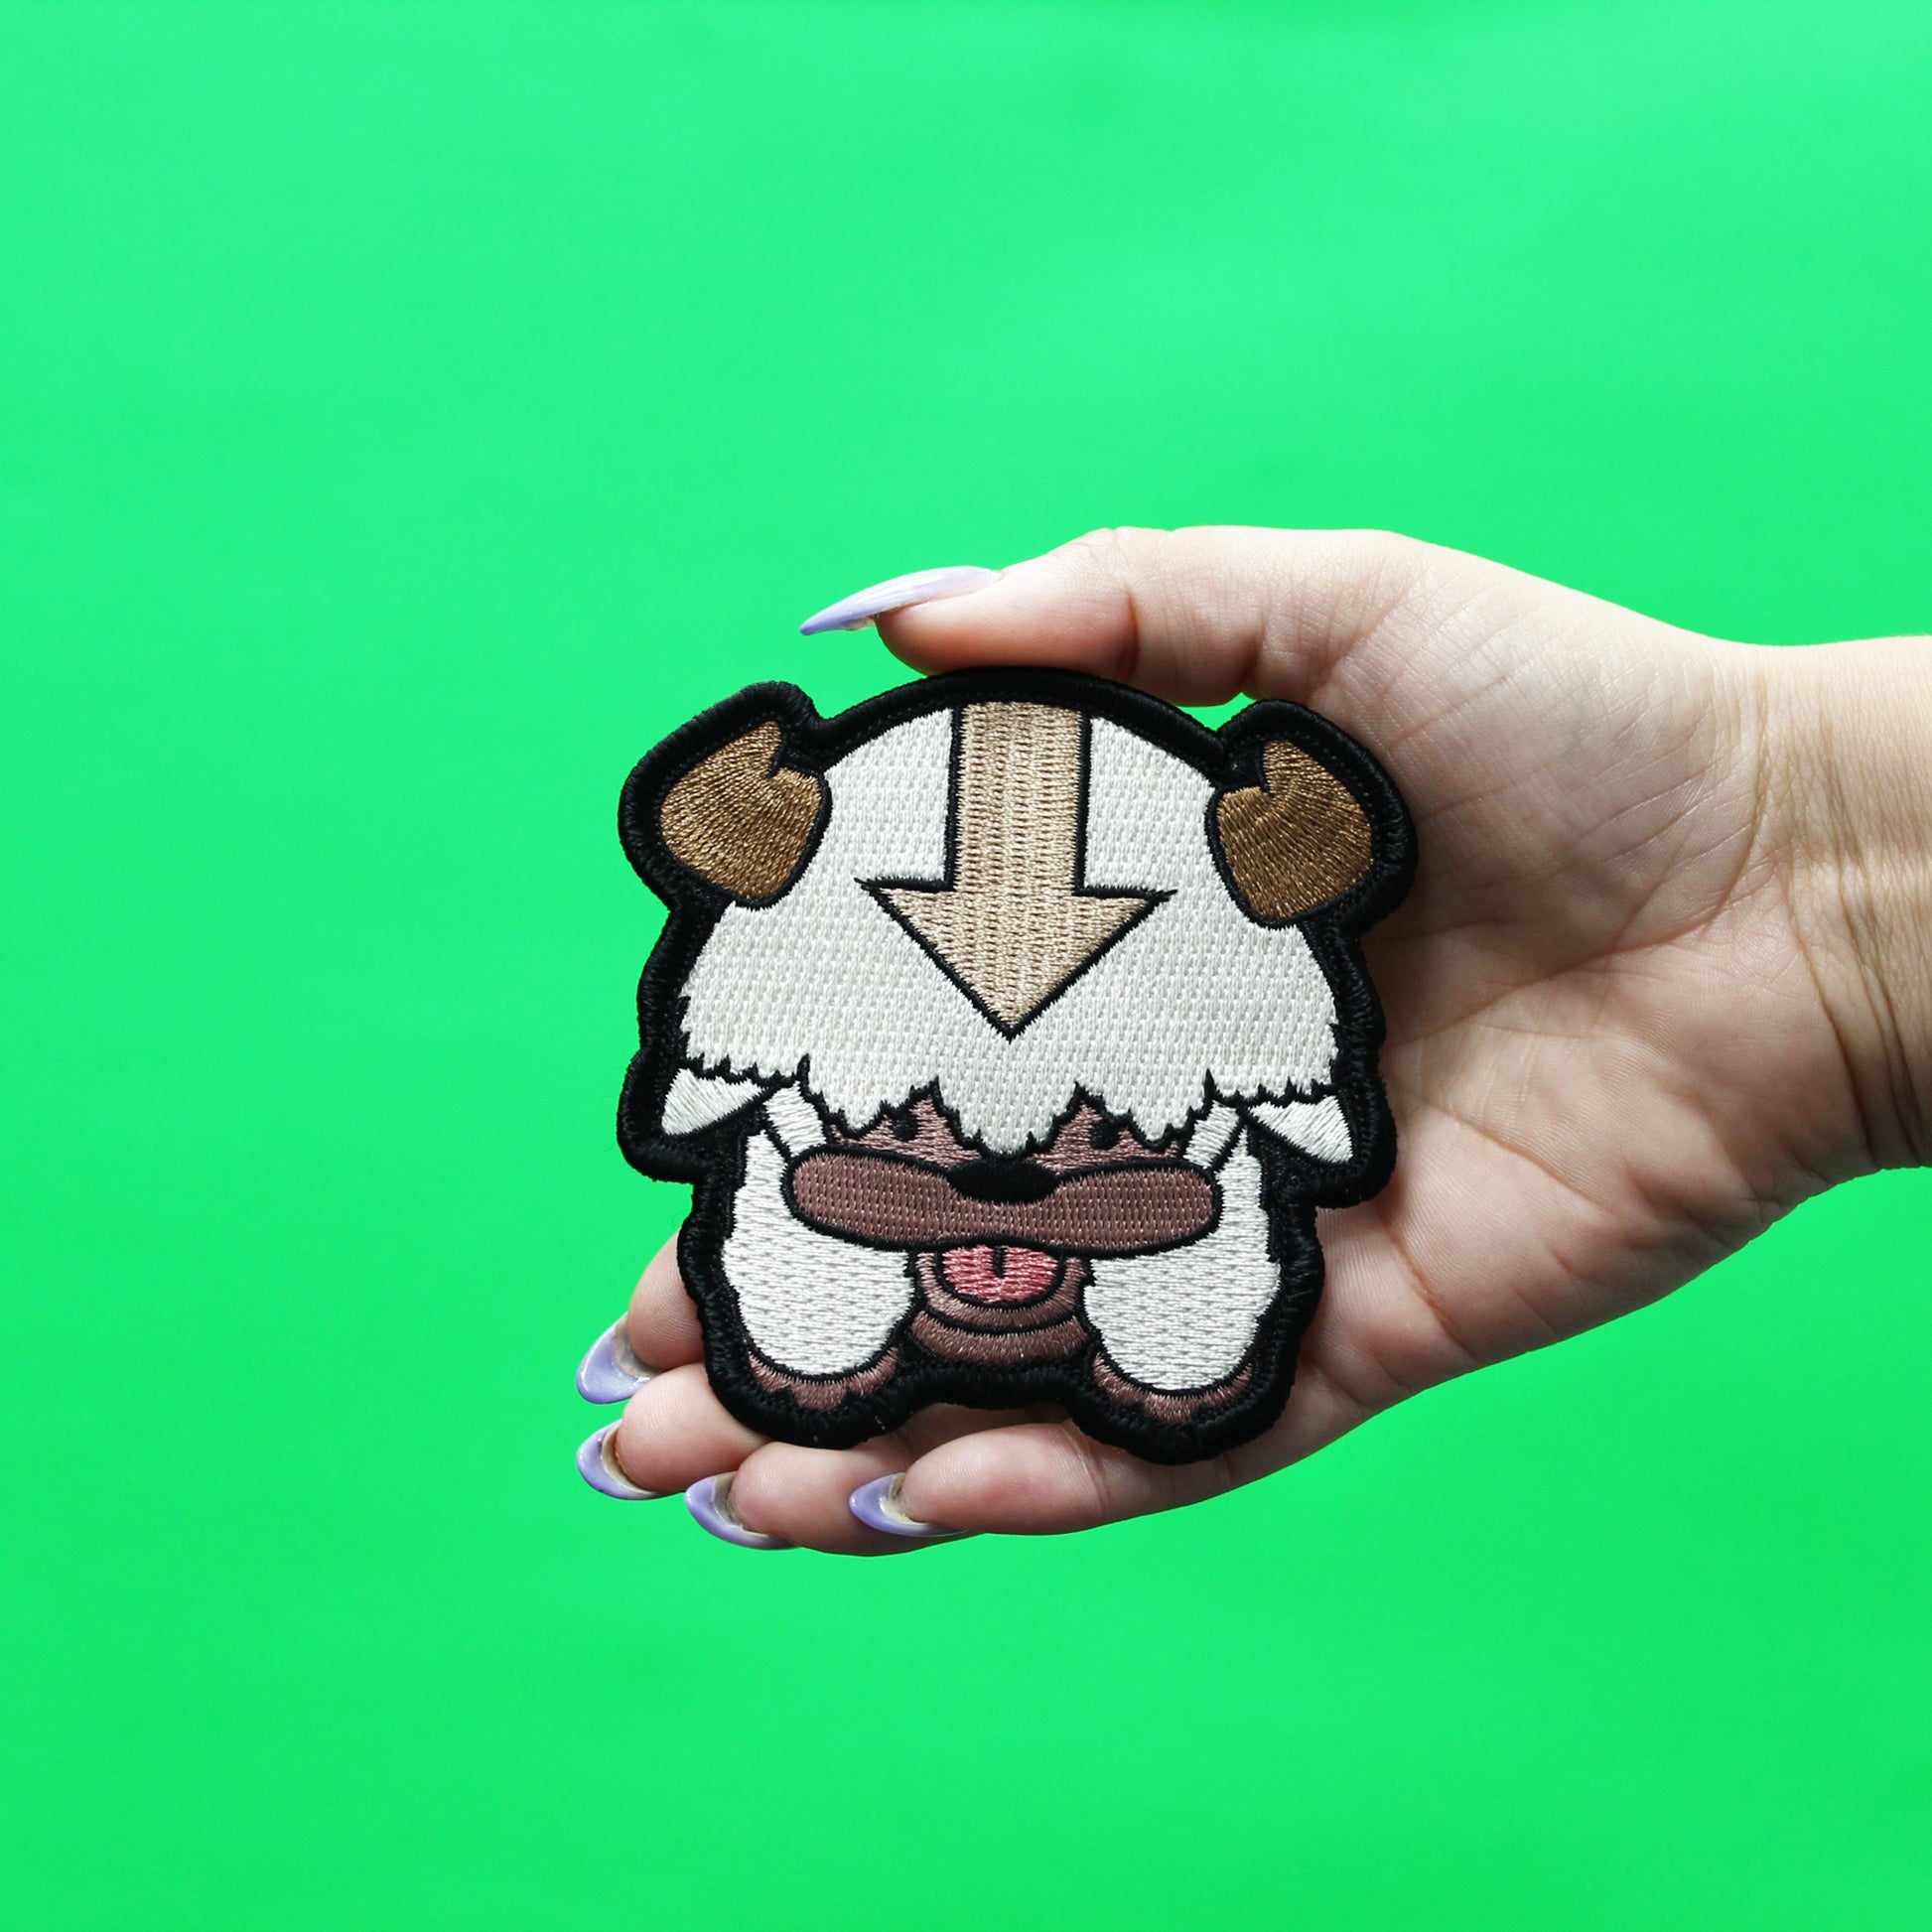 Official Avatar: The Last Airbender Patch Emoji Appa Embroidered Iron On 